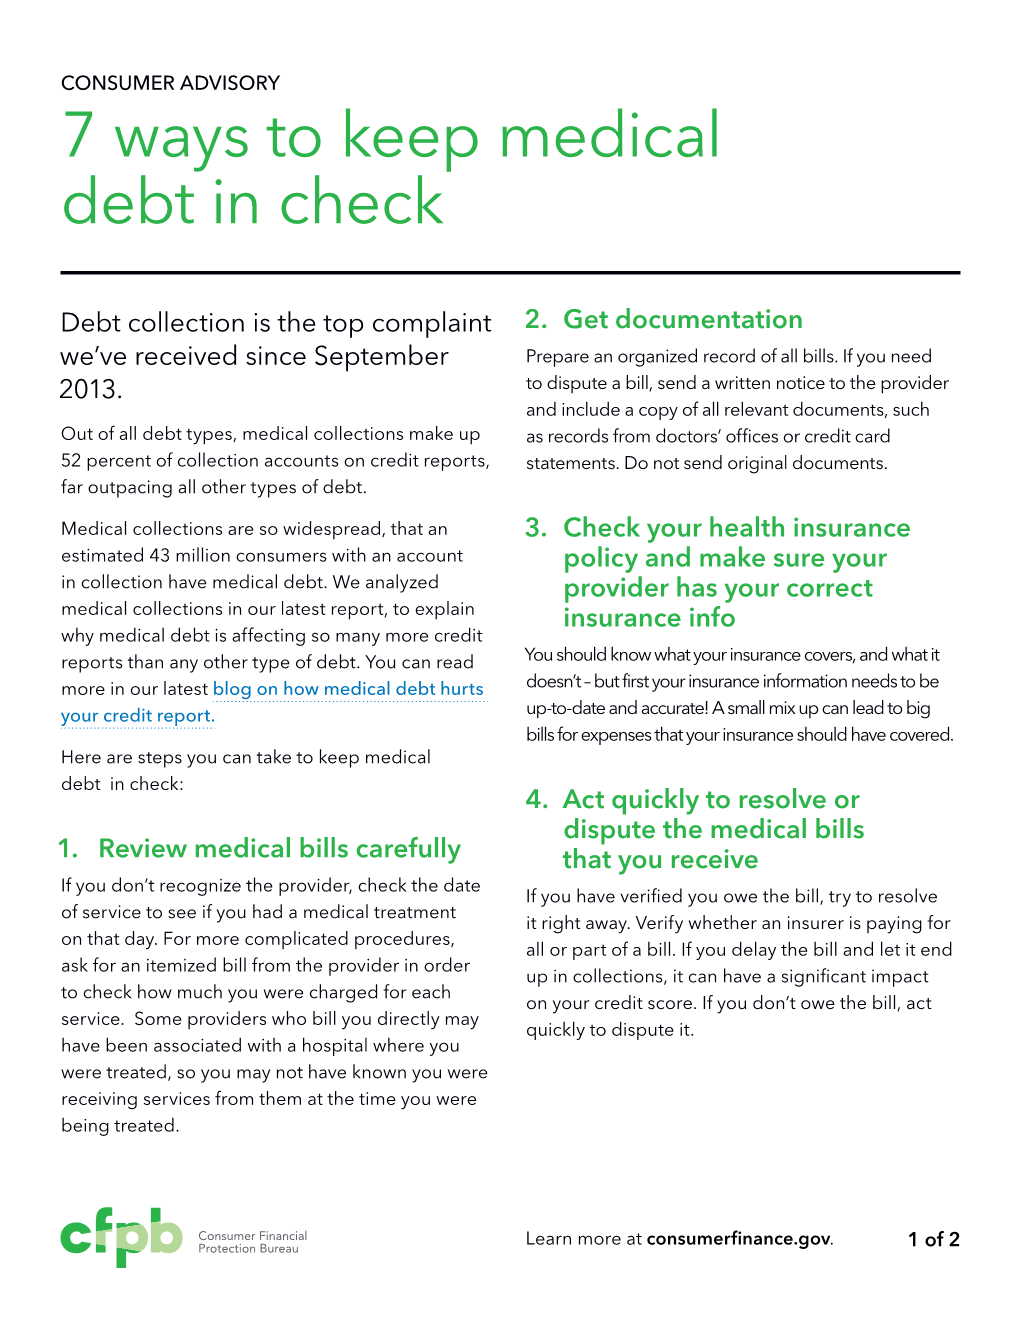 7 Ways to Keep Medical Debt in Check